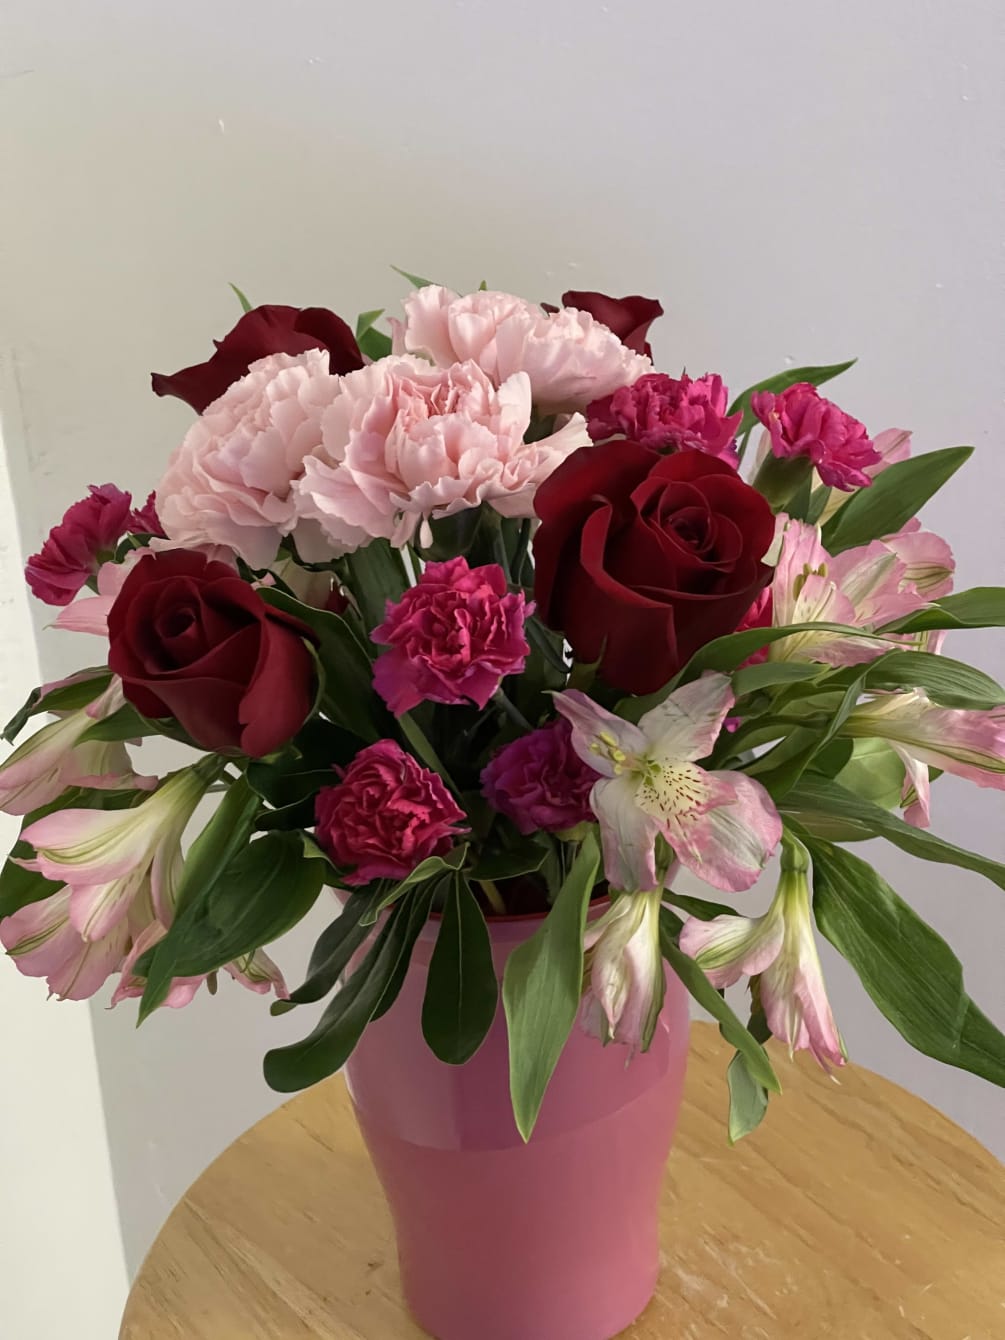 This beautiful arrangement deliver a sweet smile to the receiver. Flowers are